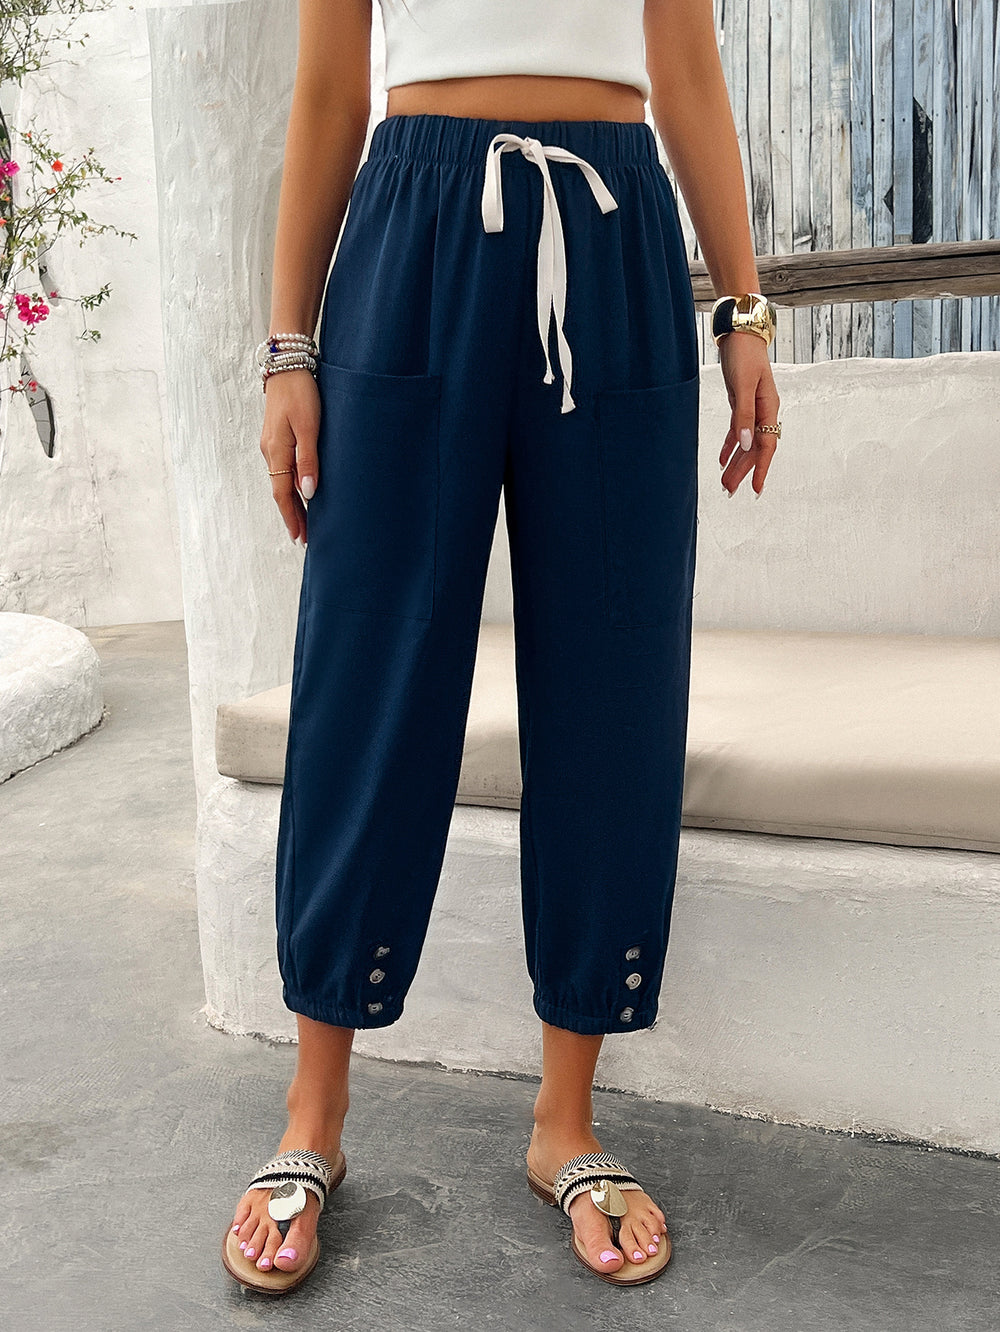 Women Clothing Spring Summer Casual Solid Color Drawstring Overalls